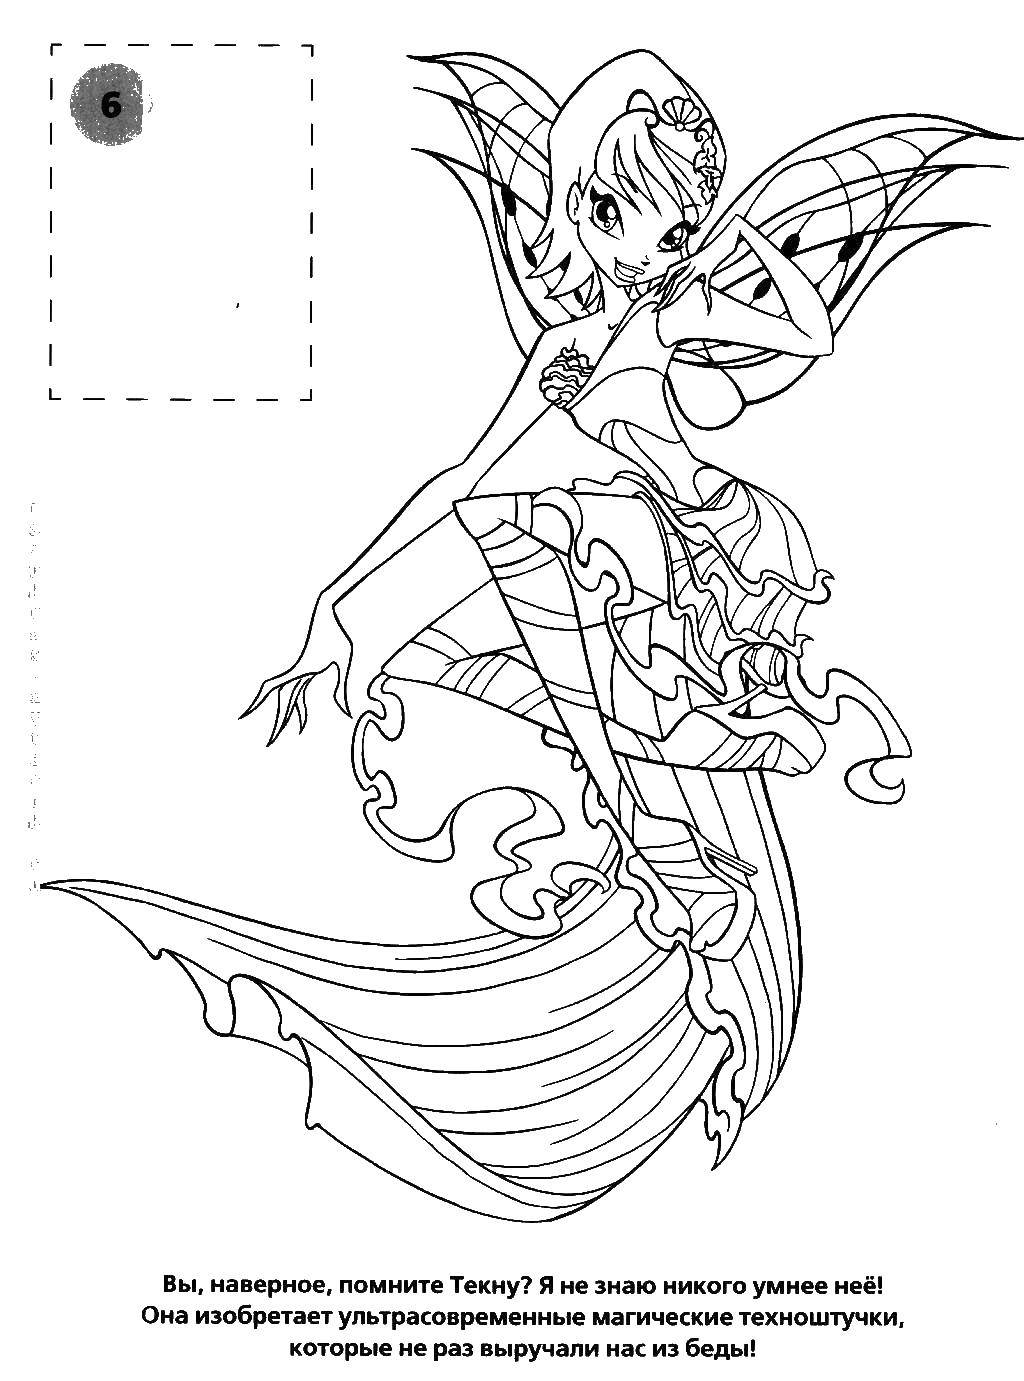 Coloring Tecna from winx club. Category Winx. Tags:  Winx, Pixie, TEKNO.